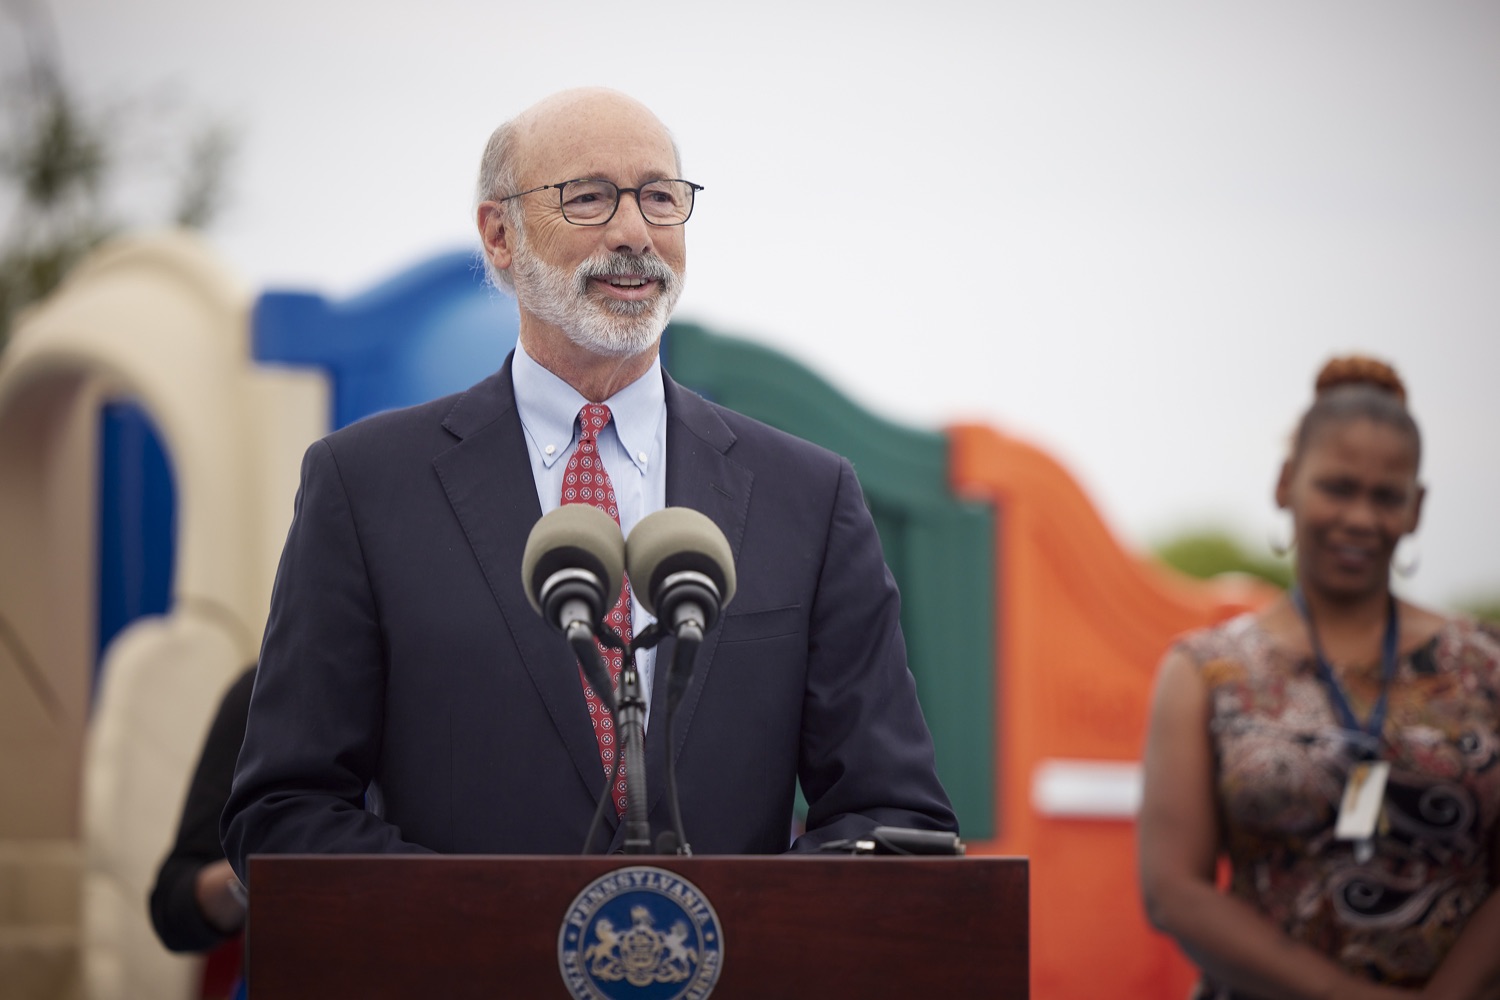 Pennsylvania Governor Tom Wolf speaks with the press.   Governor Tom Wolf today visited the Early Learning Center at Crispus Attucks in York to highlight his new state child tax credit program, modeled after the federal program, to support Pennsylvanias working families and ensure unbarred access to high-quality early childhood education.  York, PA   July 26, 2022<br><a href="https://filesource.amperwave.net/commonwealthofpa/photo/22049_gov_childTaxCredit_dz_008.JPG" target="_blank">⇣ Download Photo</a>